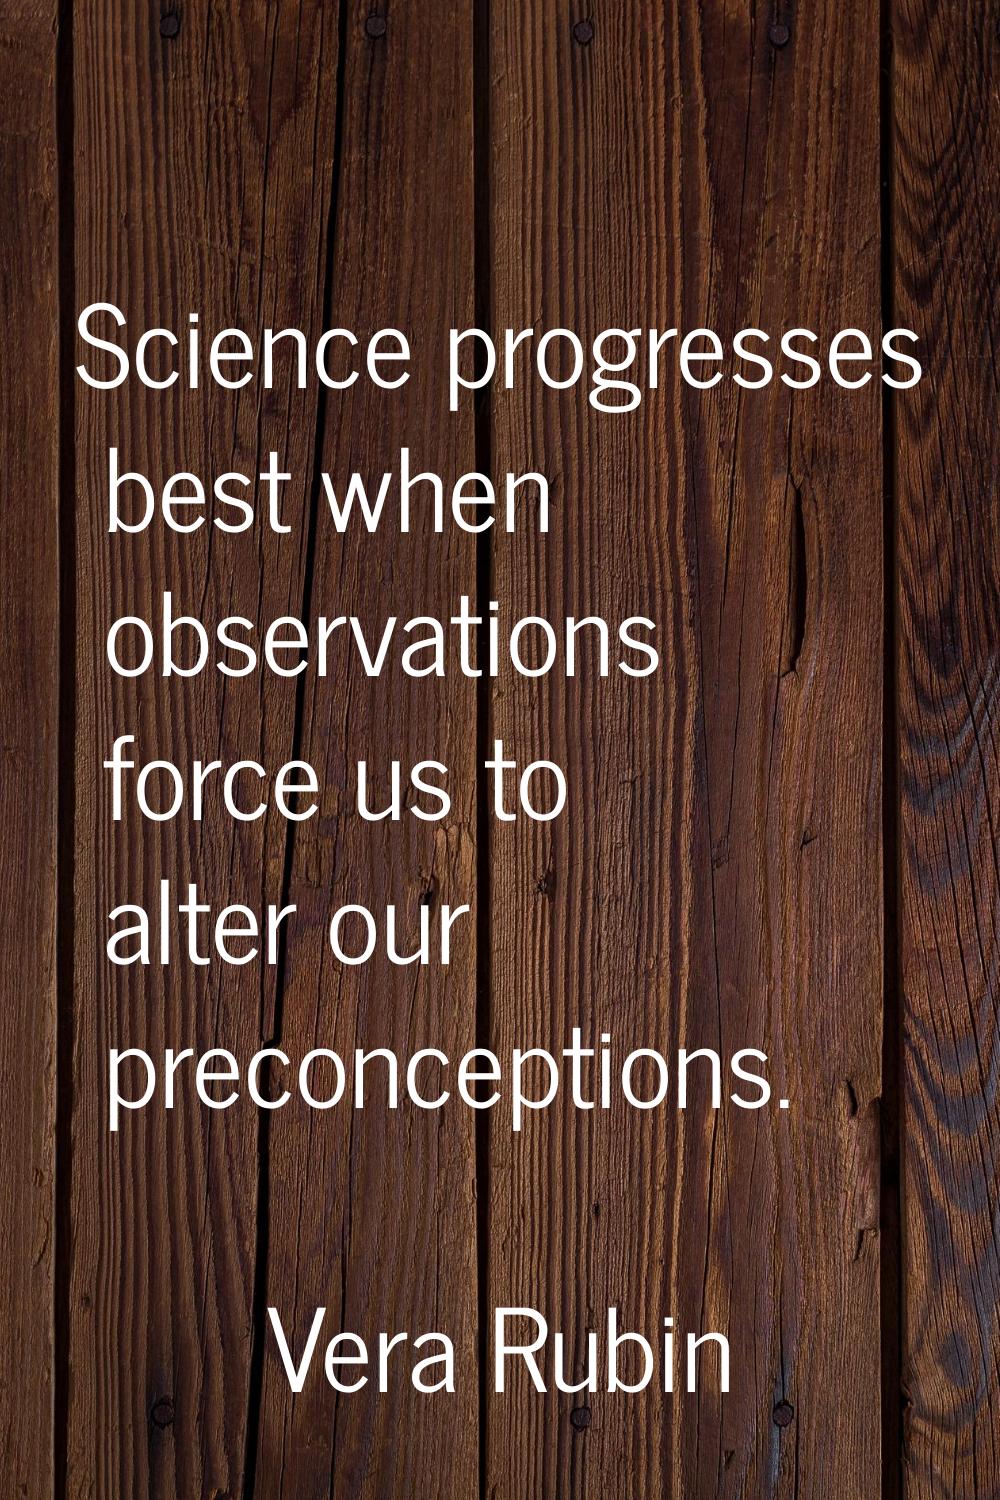 Science progresses best when observations force us to alter our preconceptions.